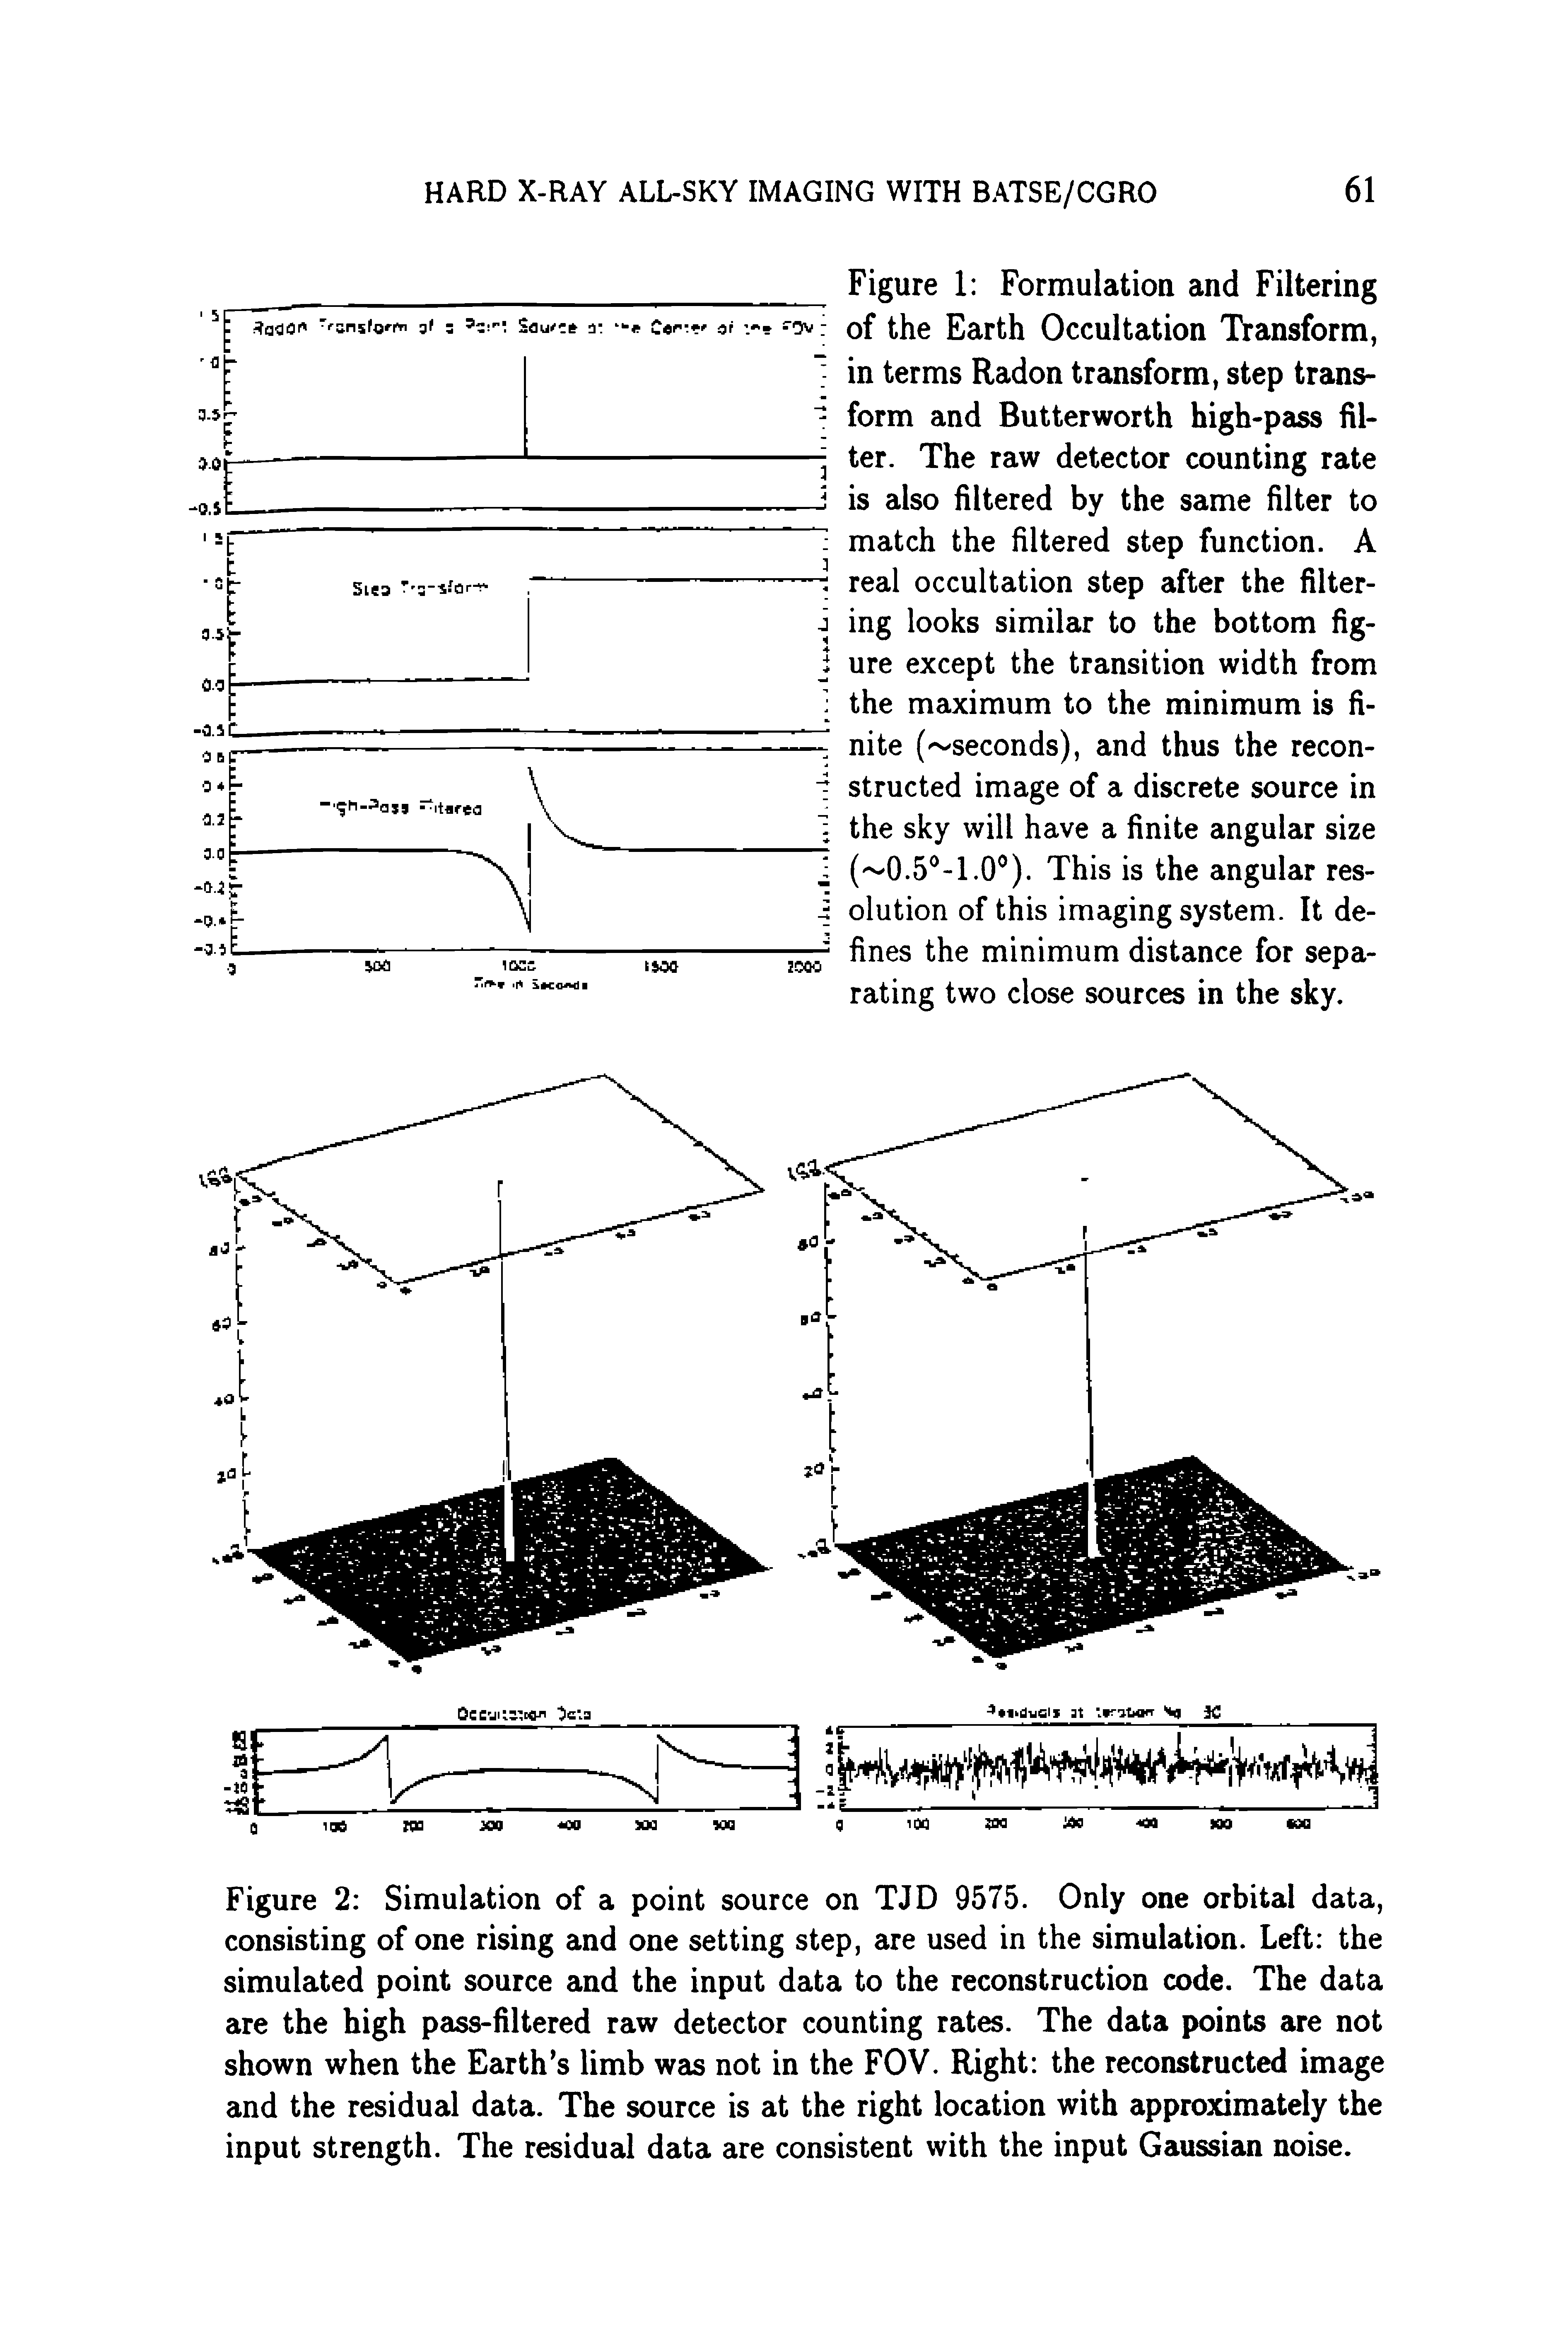 Figure 1 Formulation and Filtering of the Earth Occultation Transform, in terms Radon transform, step trans- form and Butterworth high-pass fil-ter. The raw detector counting rate J is also filtered by the same filter to match the filtered step function. A real occultation step after the filter-i ing looks similar to the bottom fig-j ure except the transition width from the maximum to the minimum is fi- nite ( seconds), and thus the recon-4 structed image of a discrete source in 1 the sky will have a finite angular size I This is the angular res-...